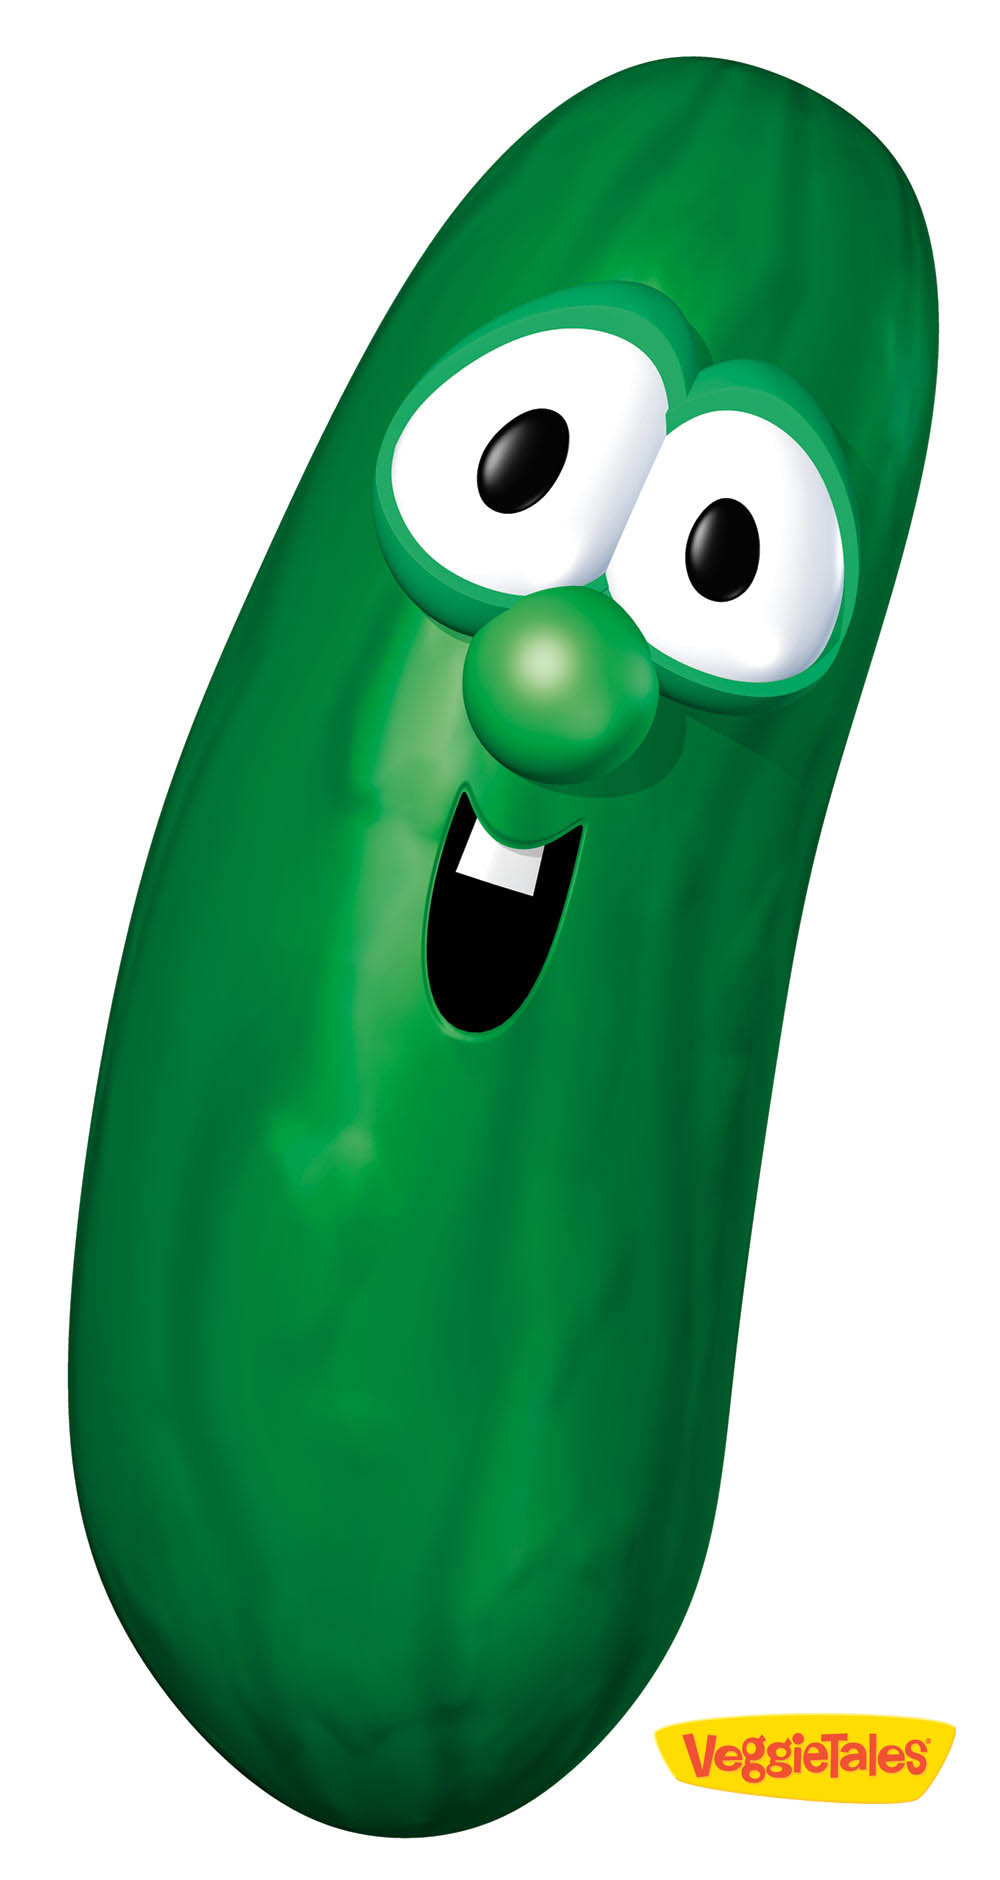 Cucumber clipart. Larry the 